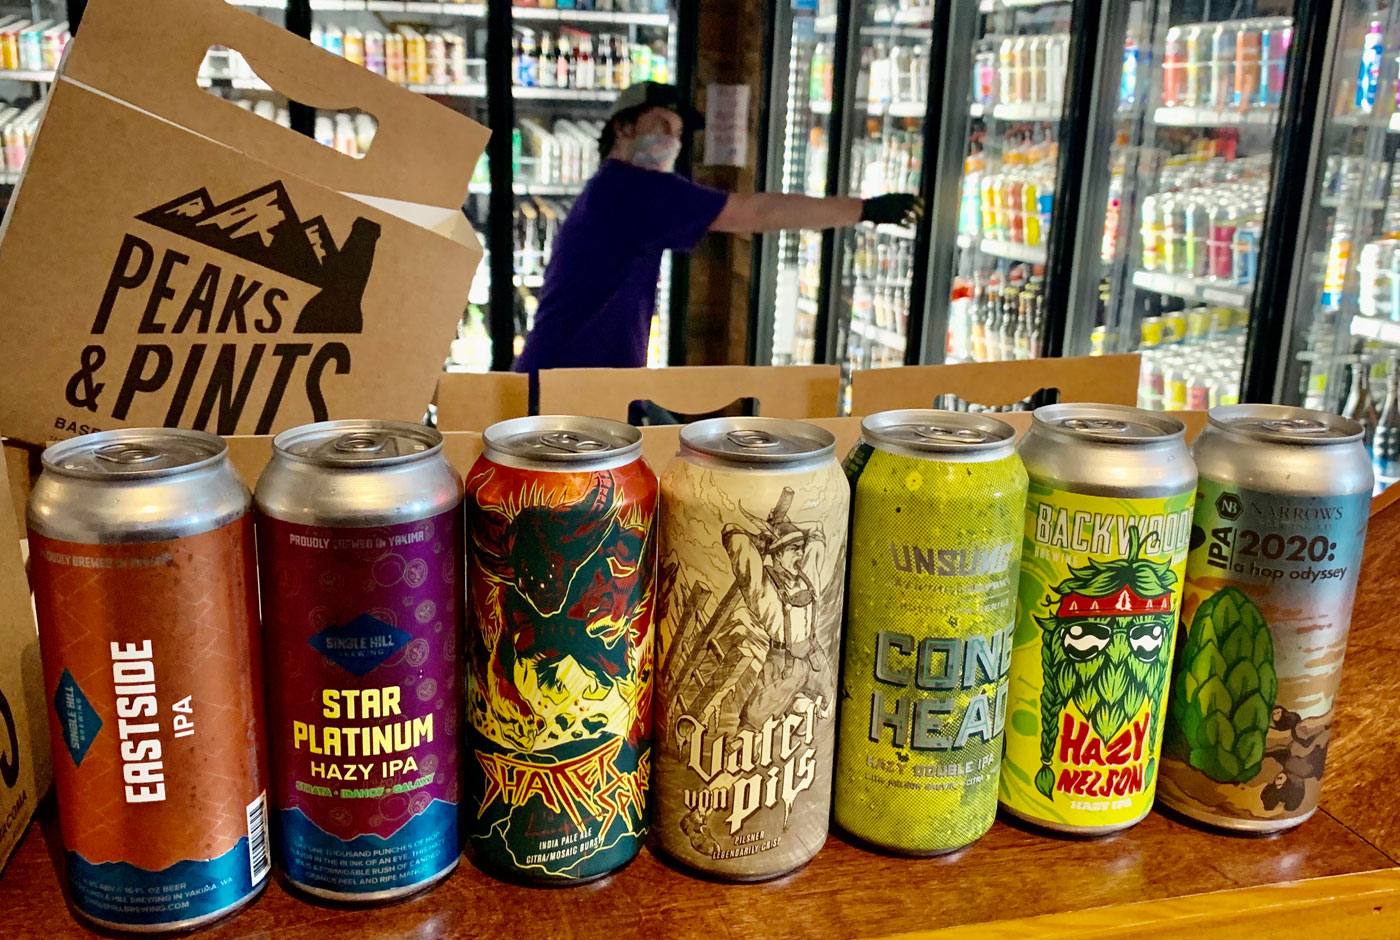 Peaks-and-Pints-New-Beers-In-Stock-5-2-20